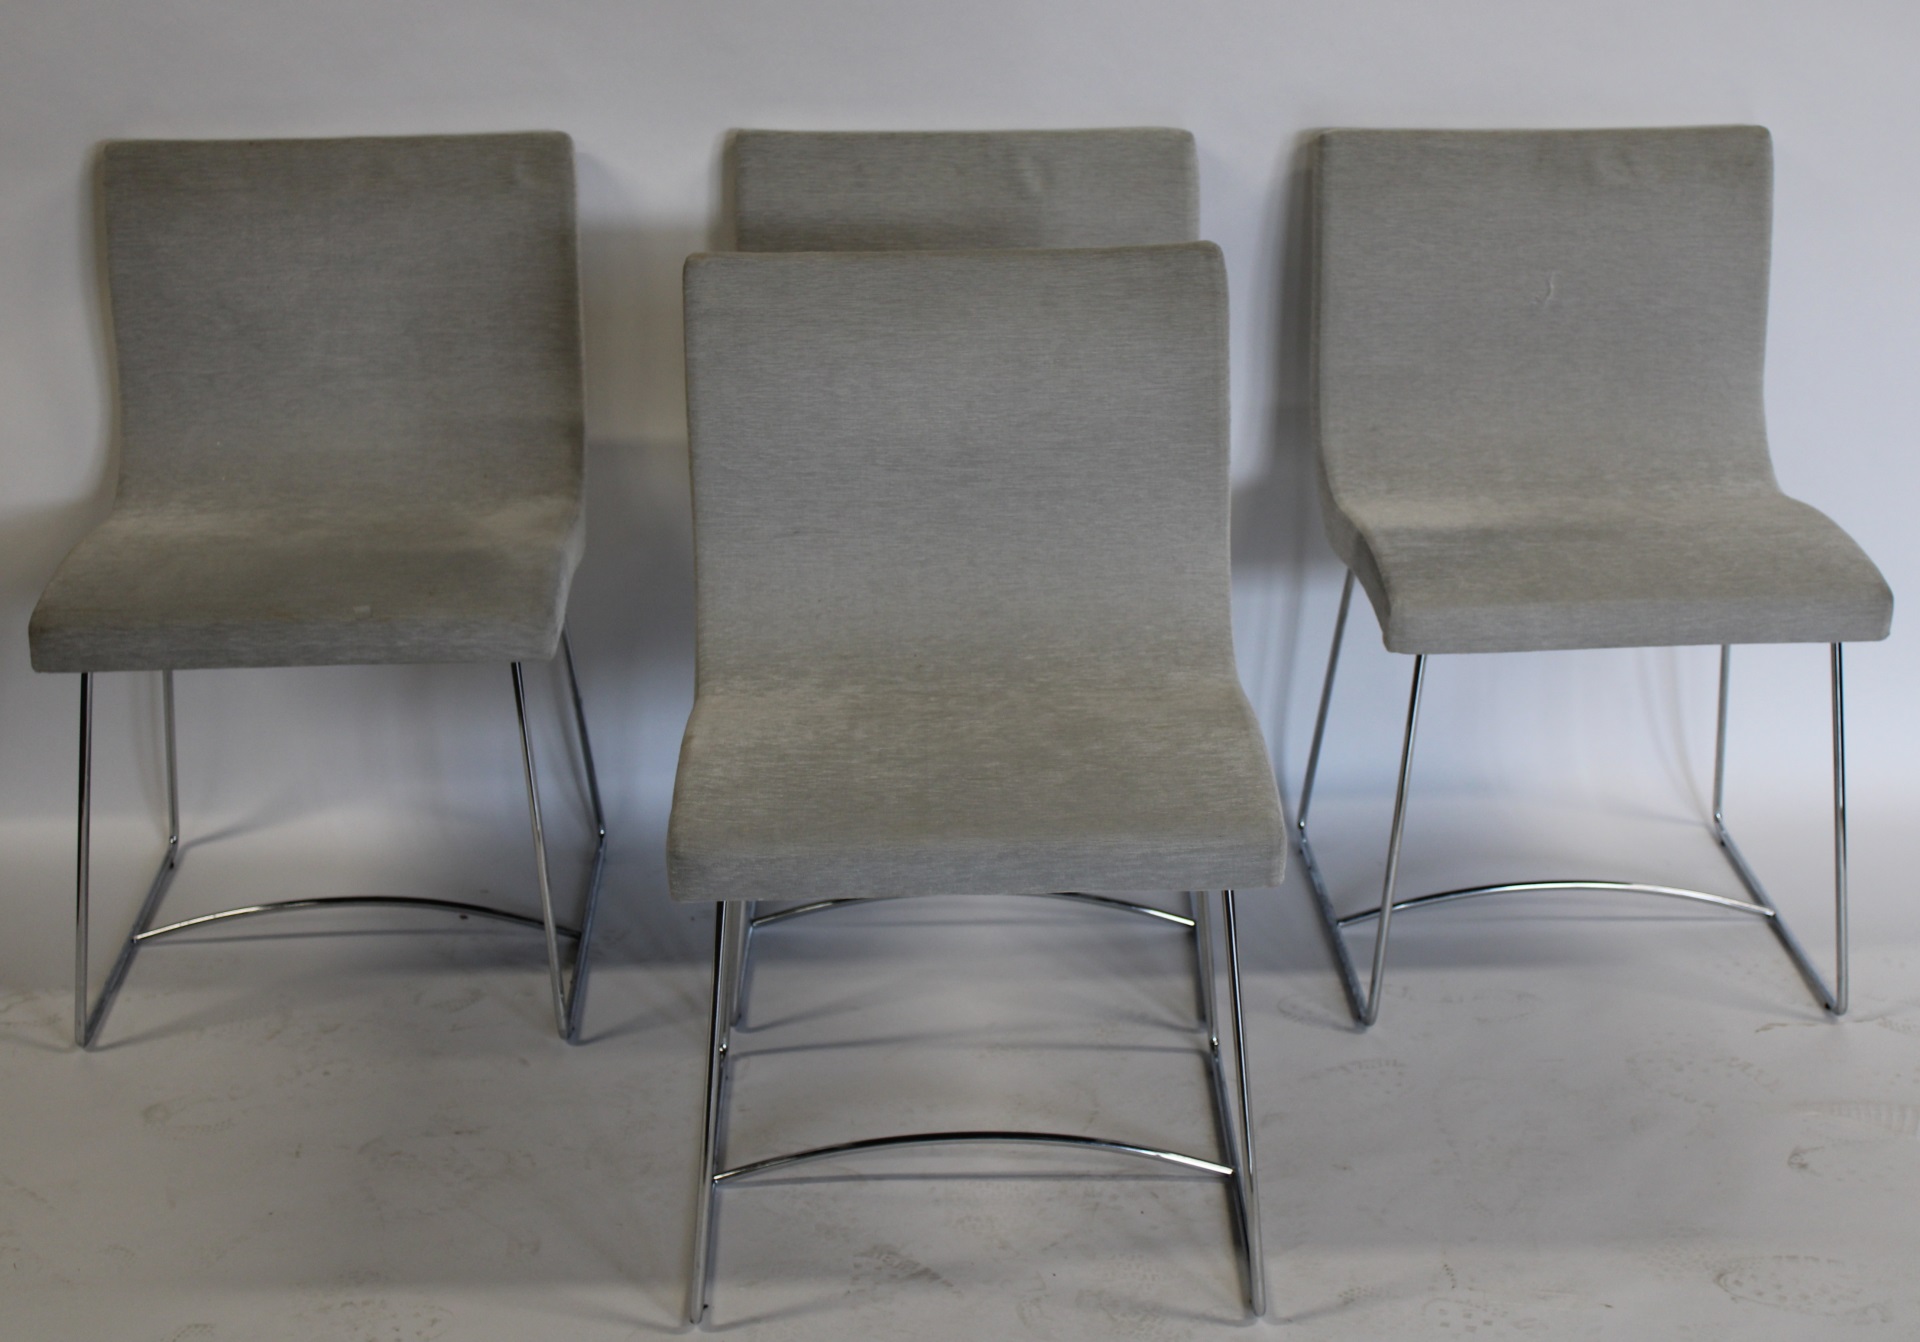 4 LIGNE ROSET CHAIRS A SUEDE 3bbff2